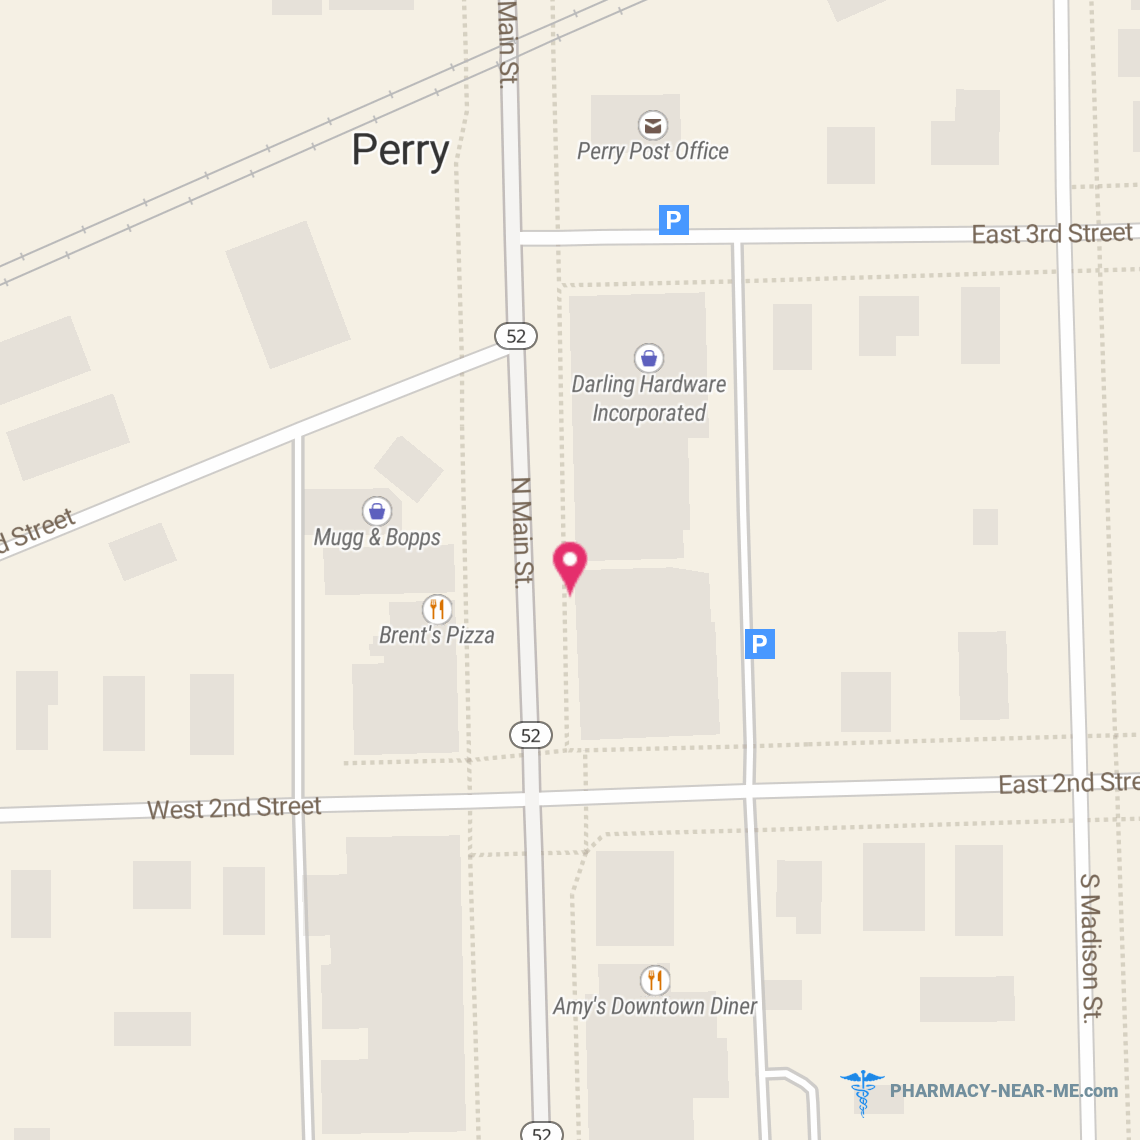 CENTRAL PHARMACY-PERRY - Pharmacy Hours, Phone, Reviews & Information: 150 South Main Street, Perry, Michigan 48872, United States